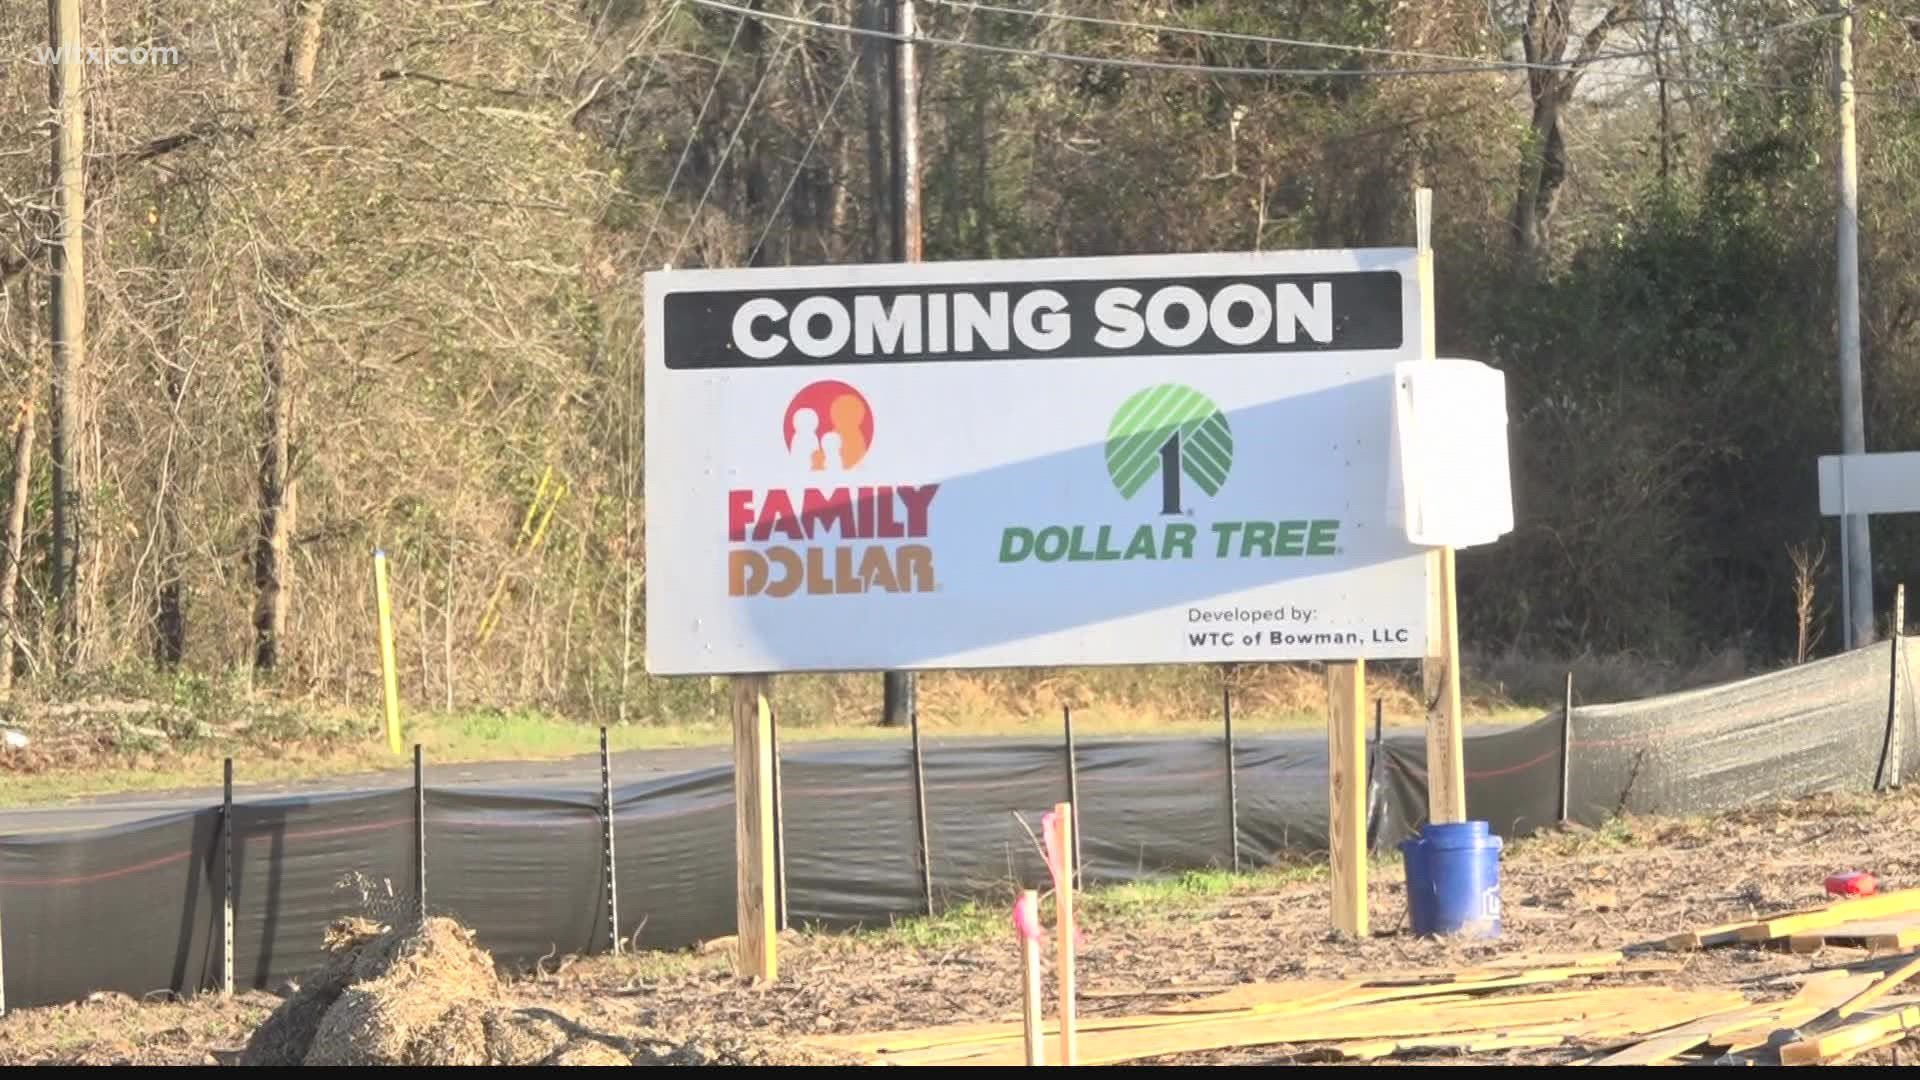 A new Family Dollar in the town of Bowman, SC will bring more accessible grocery options.